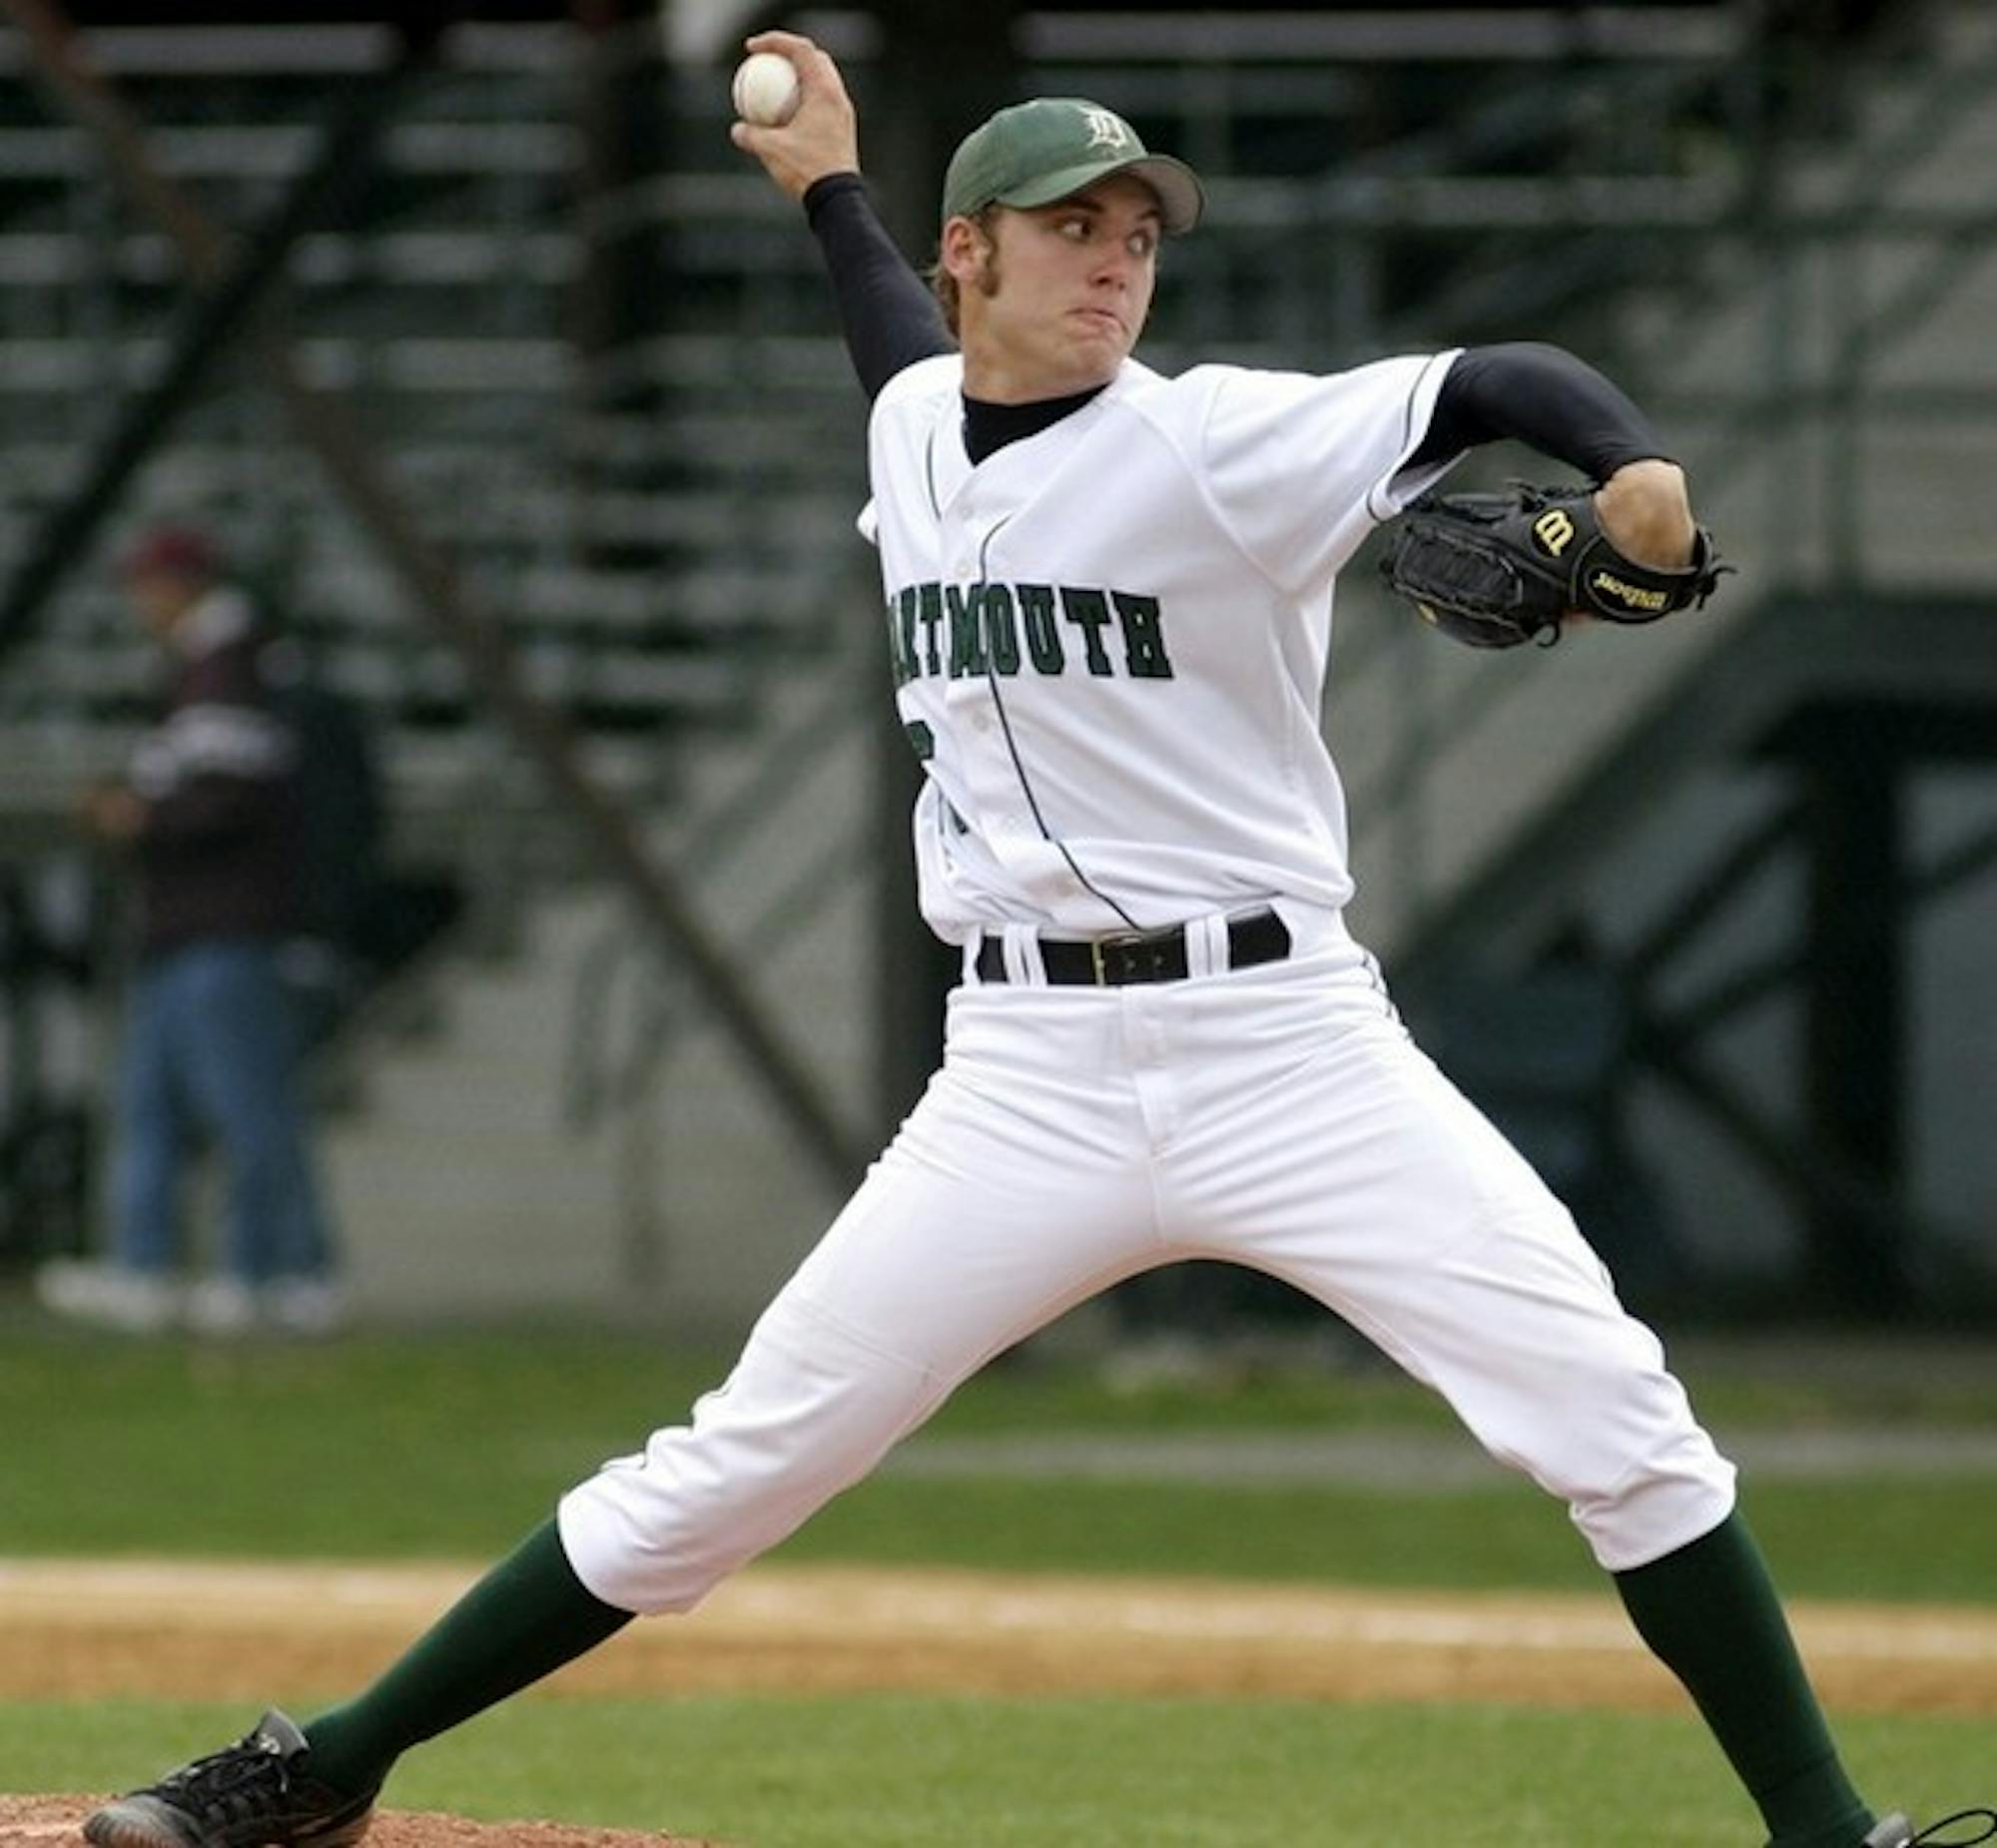 Josh Faiola '06 was drafted in the 24th round by the Baltimore Orioles.